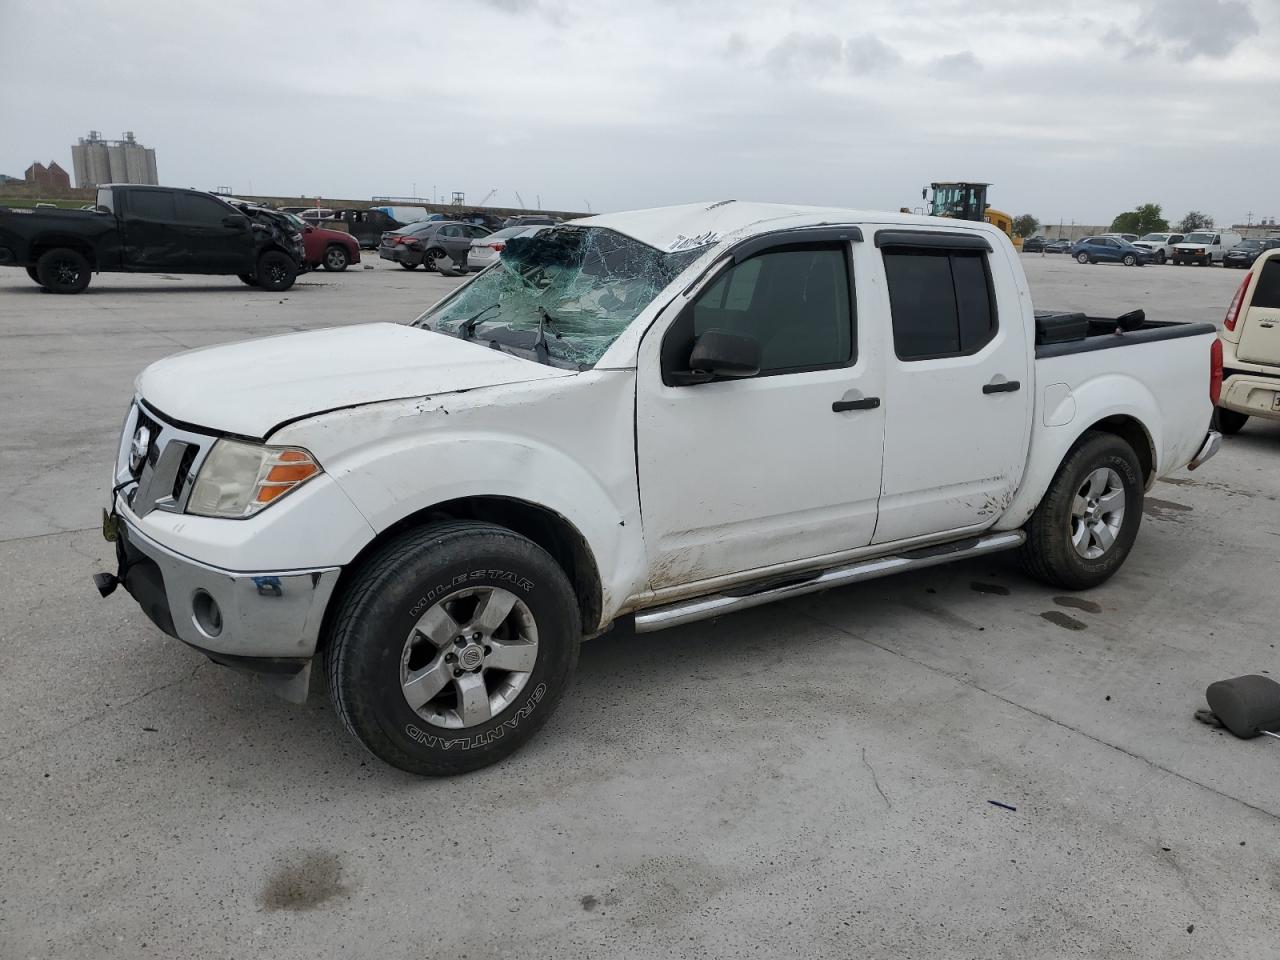 vin: 1N6AD07UX9C406619 1N6AD07UX9C406619 2009 nissan navara (frontier) 4000 for Sale in 70129 2348, La - New Orleans, New Orleans, USA